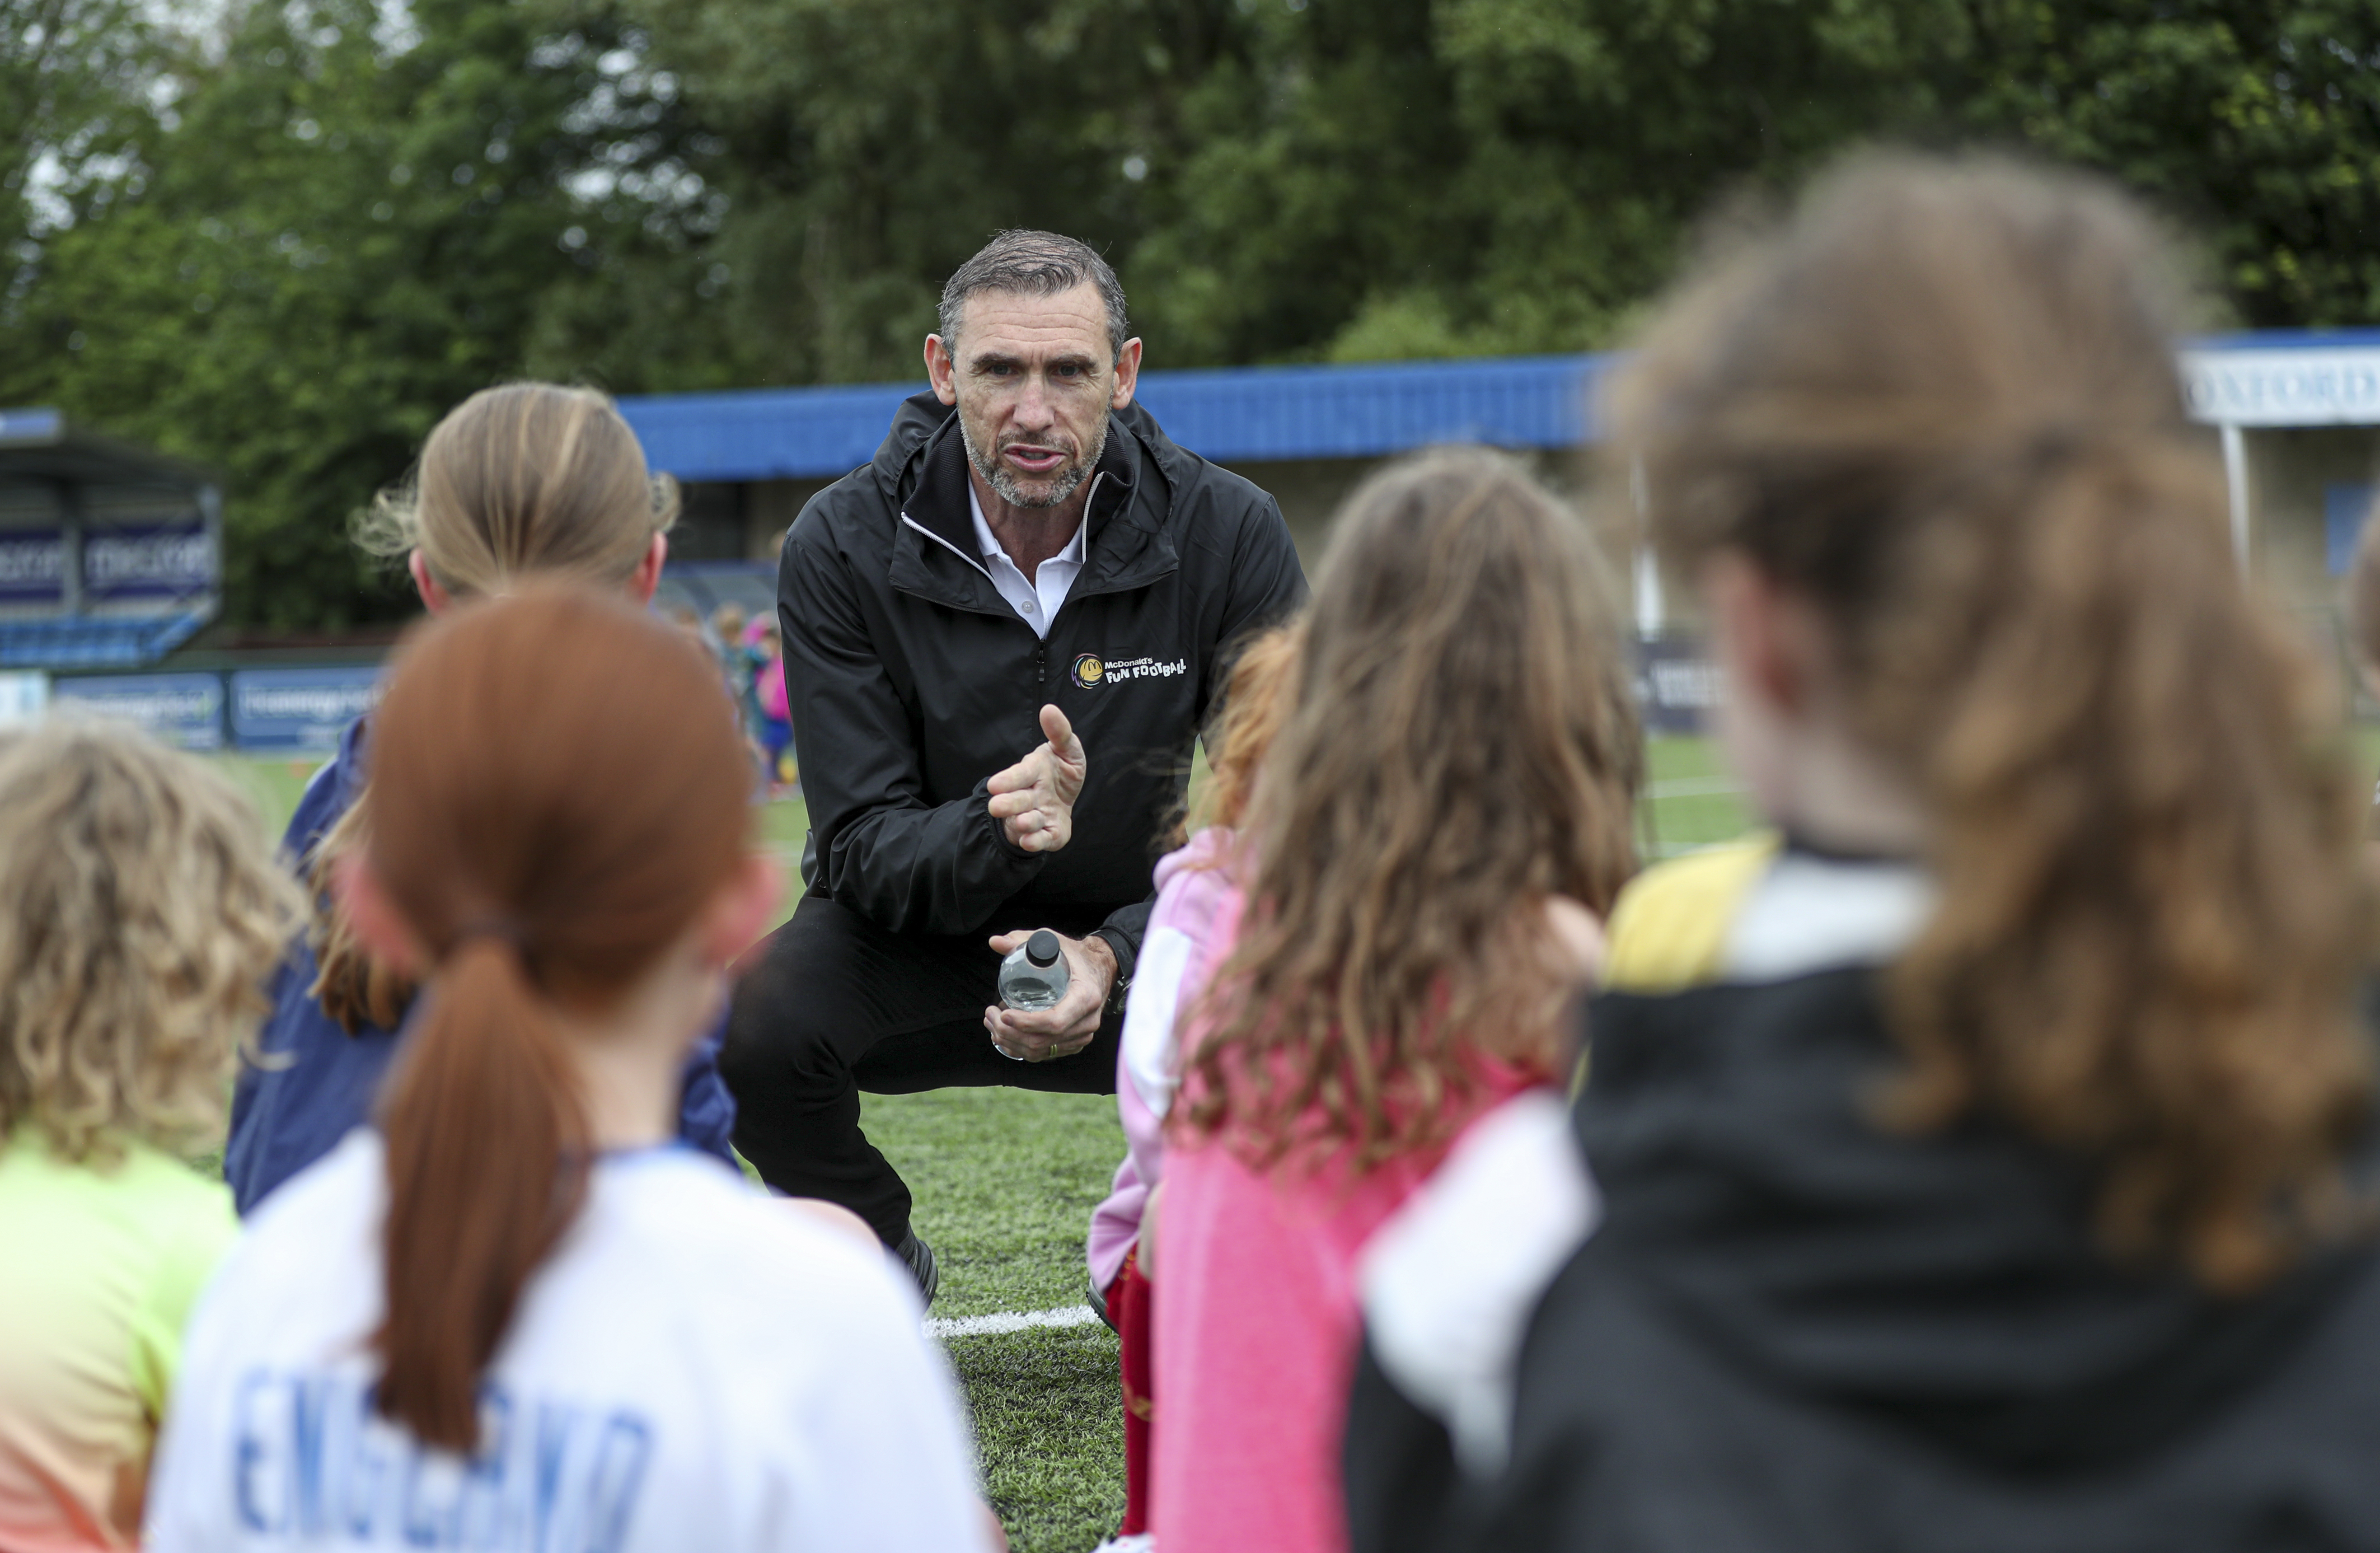 Martin Keown takes part in the McDonald's fun football session at Oxford City Football Club.